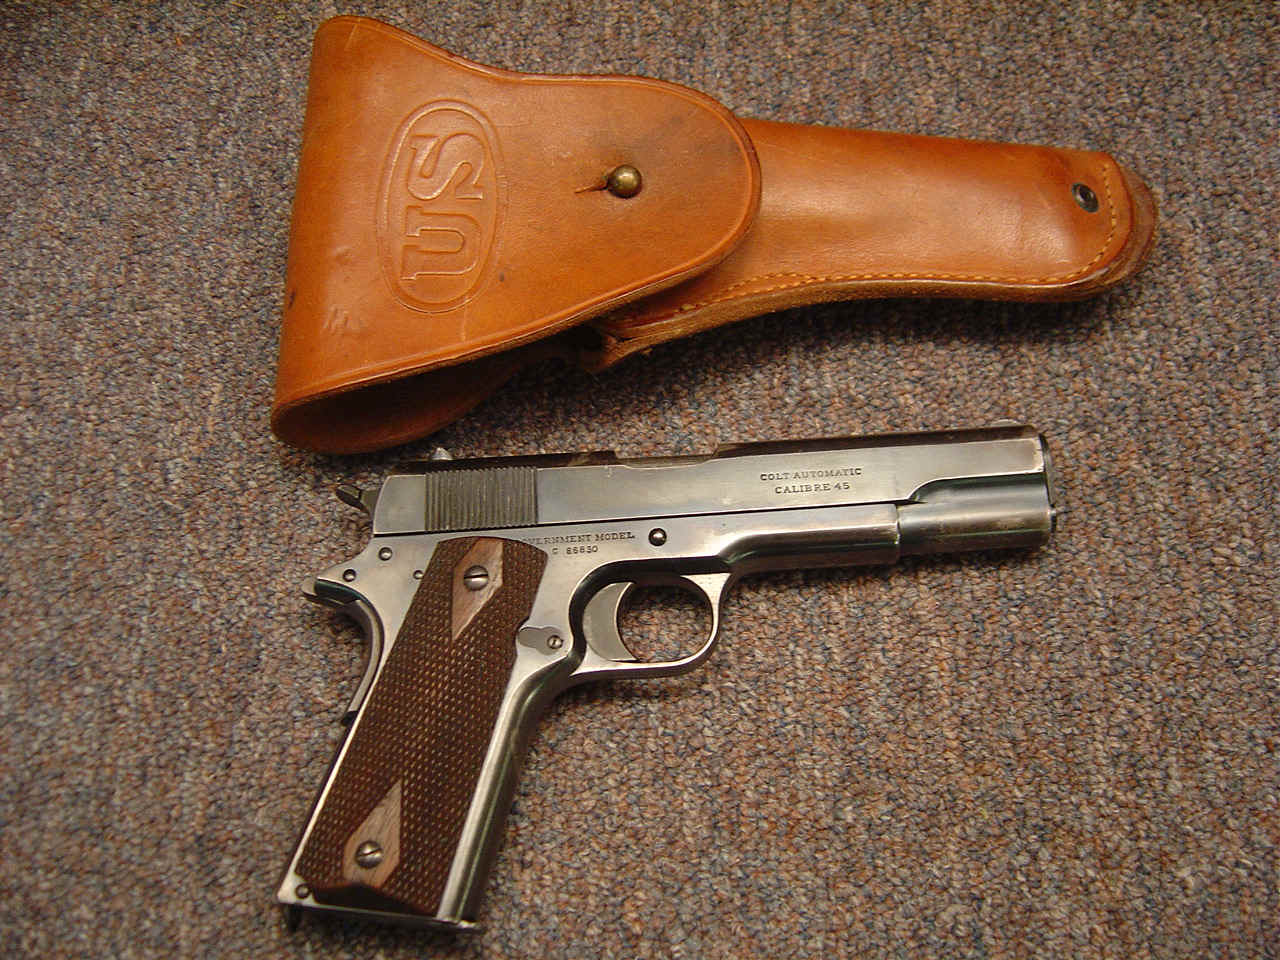 *Colt Commercial Model 1911 Semi-Auto Pistol, with Leather Military Holster